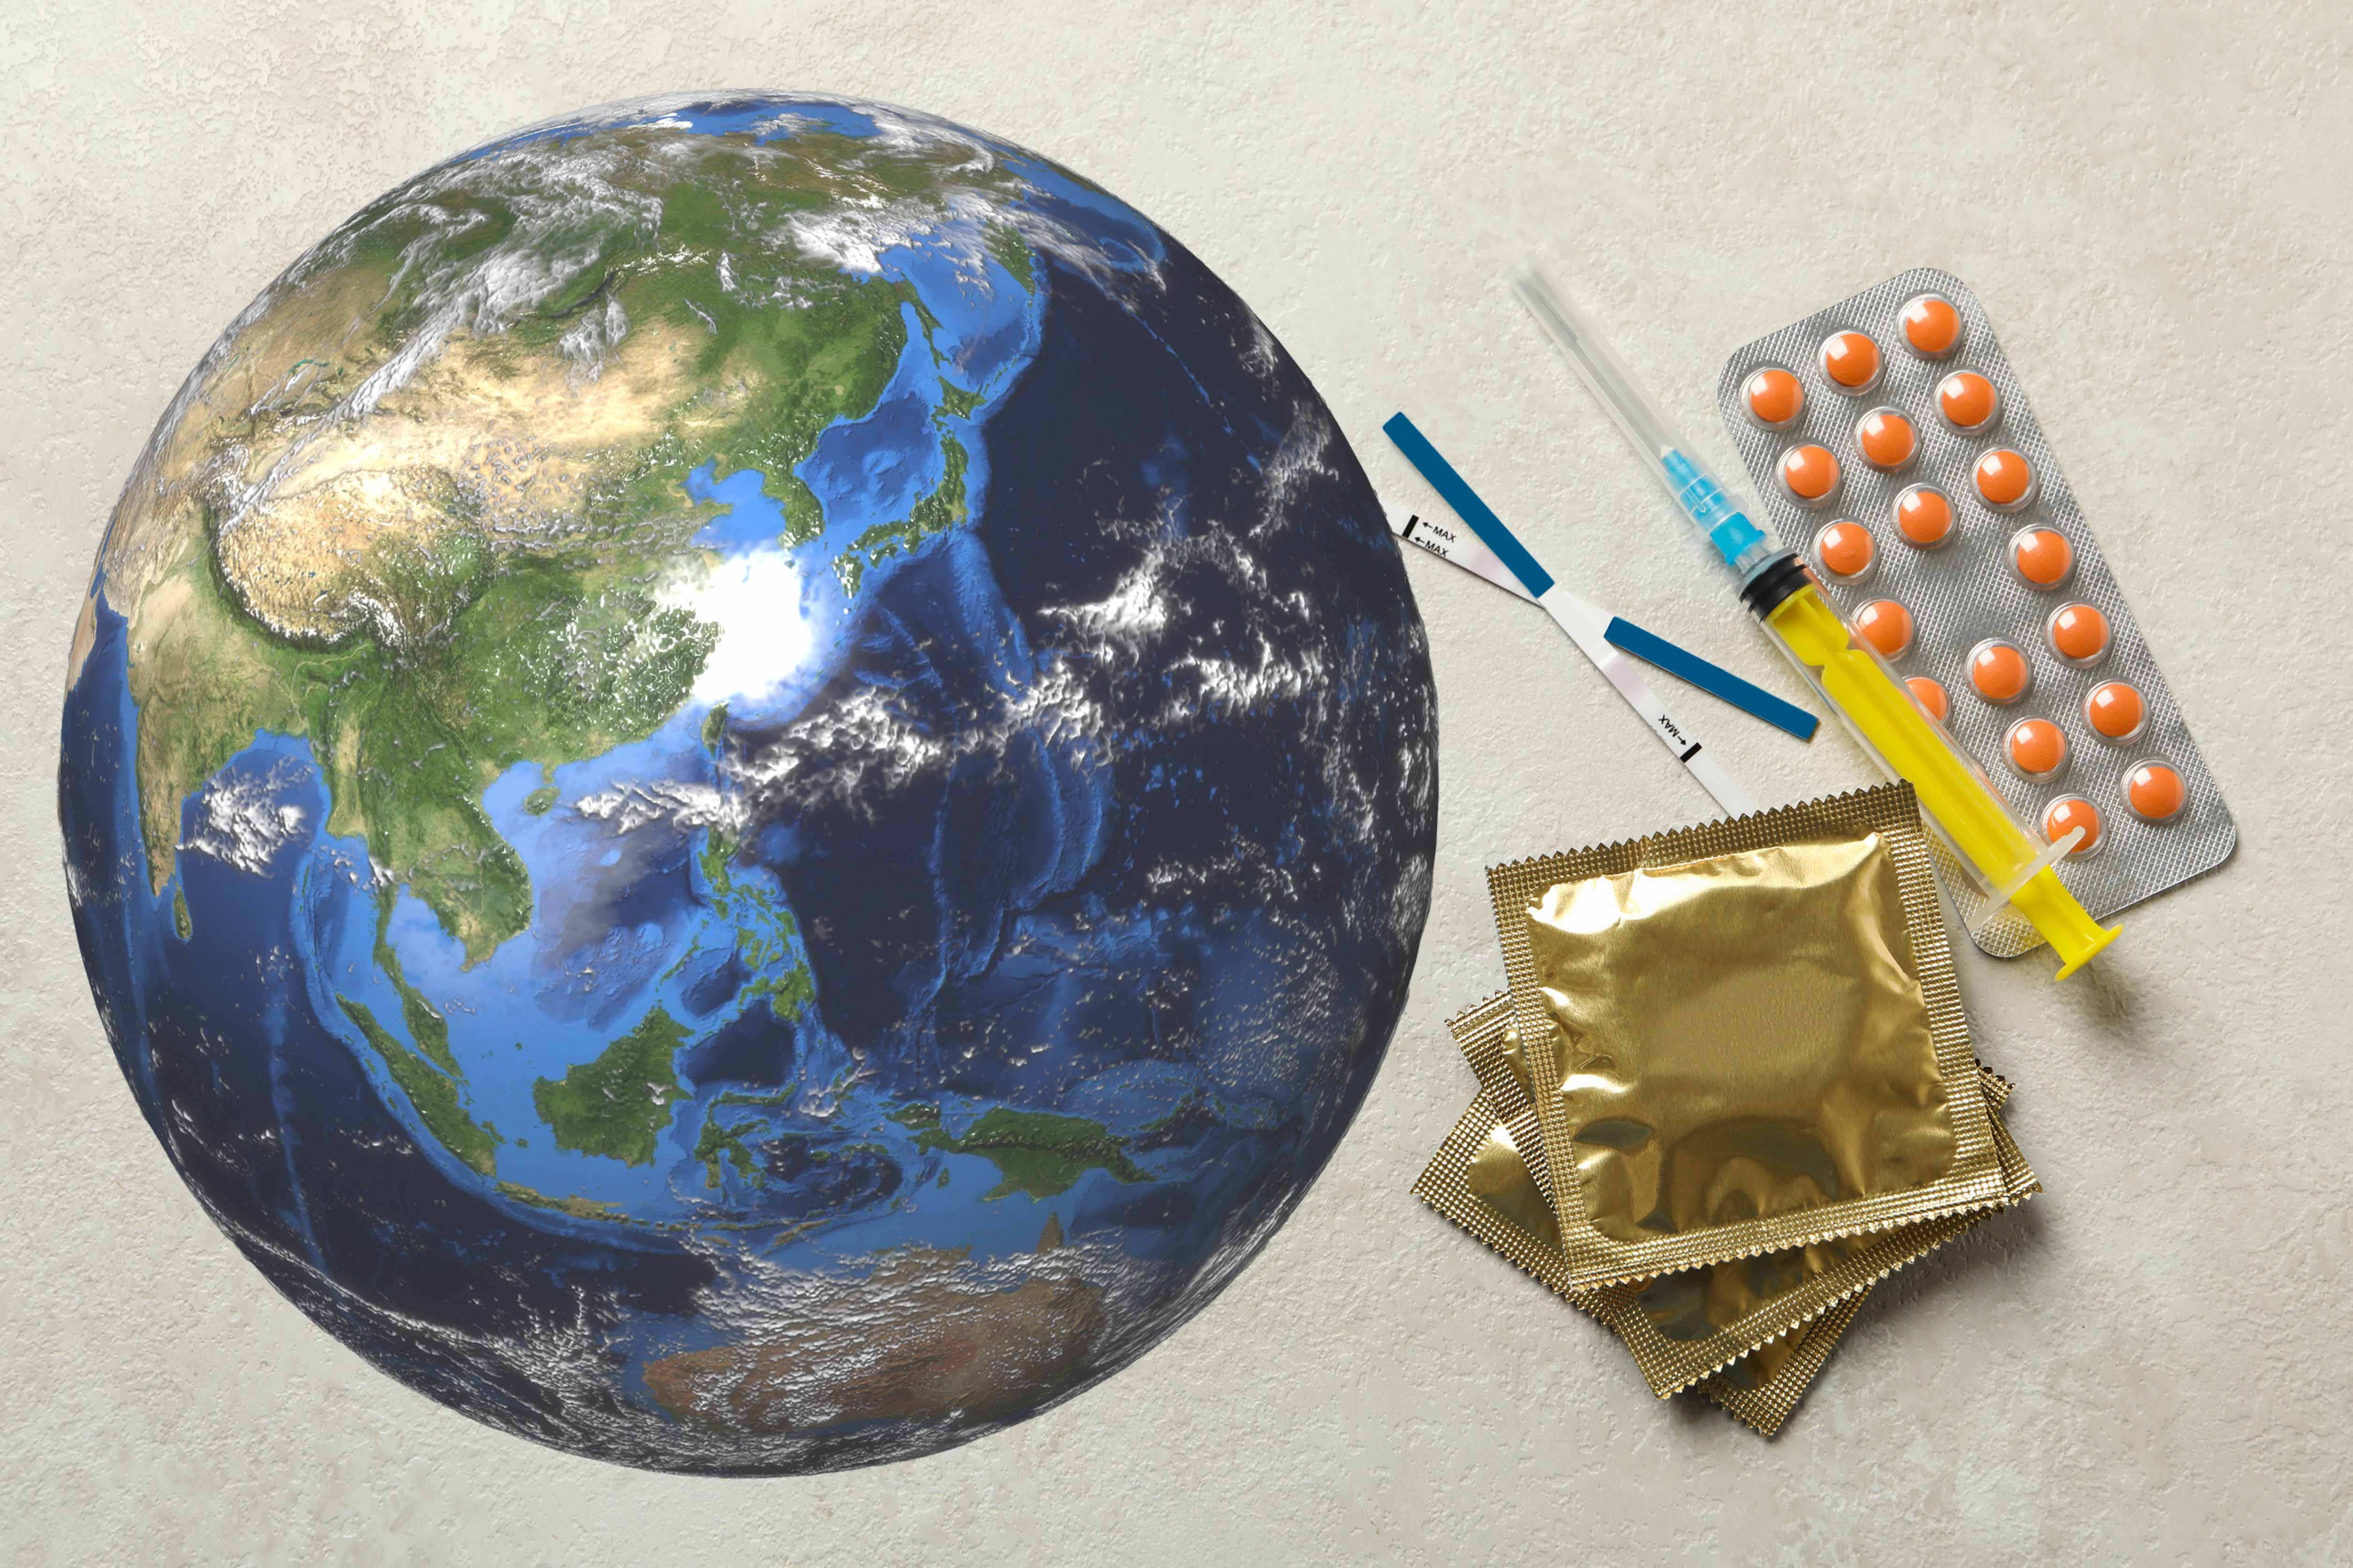 Photo of contraception methods and a world globe